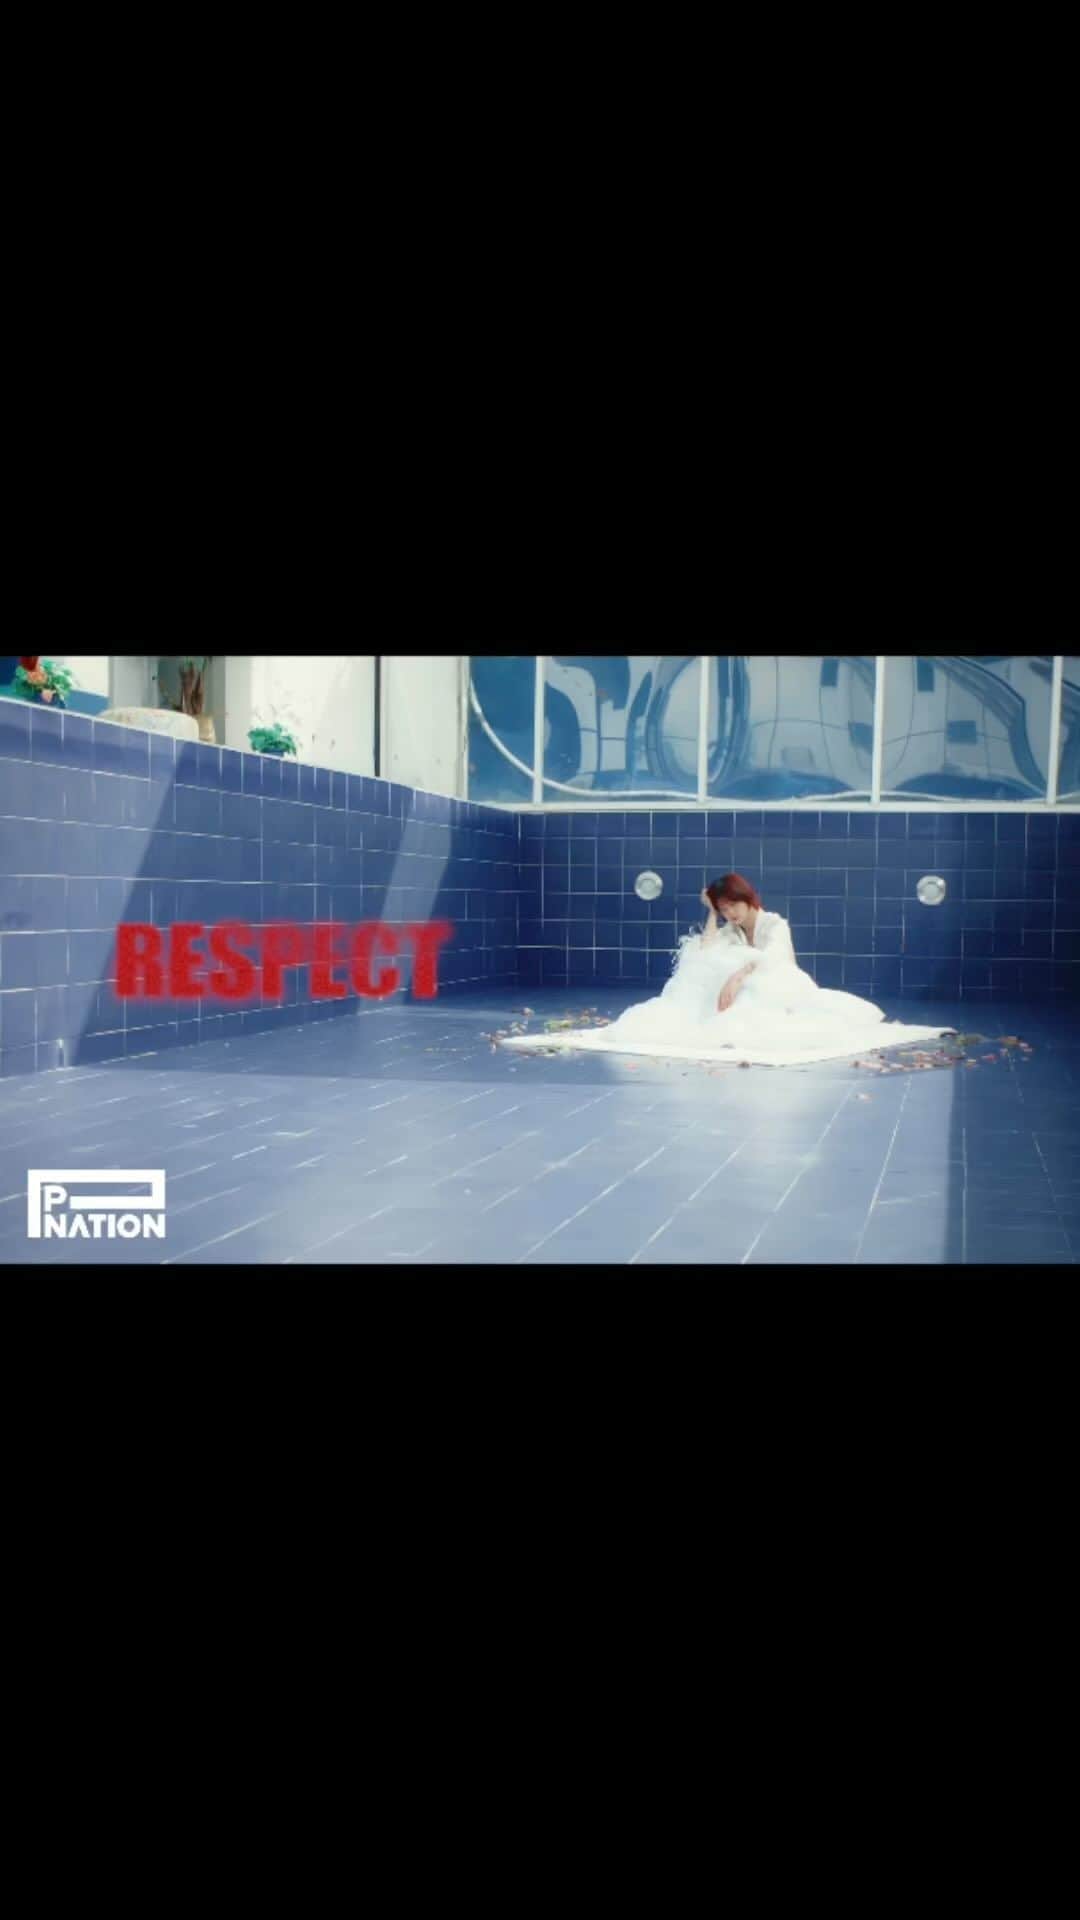 PSYのインスタグラム：「[An Shinae] 안신애 Single [Respect] OUT NOW  🎬 ‘Respect’ MV (starring AIKI) 👉 link in bio  @shinae_an from @pnation.official starring @aiki_kr   #안신애 #AnShinae #Respect #아이키 #AIKI  #PNATION #피네이션」